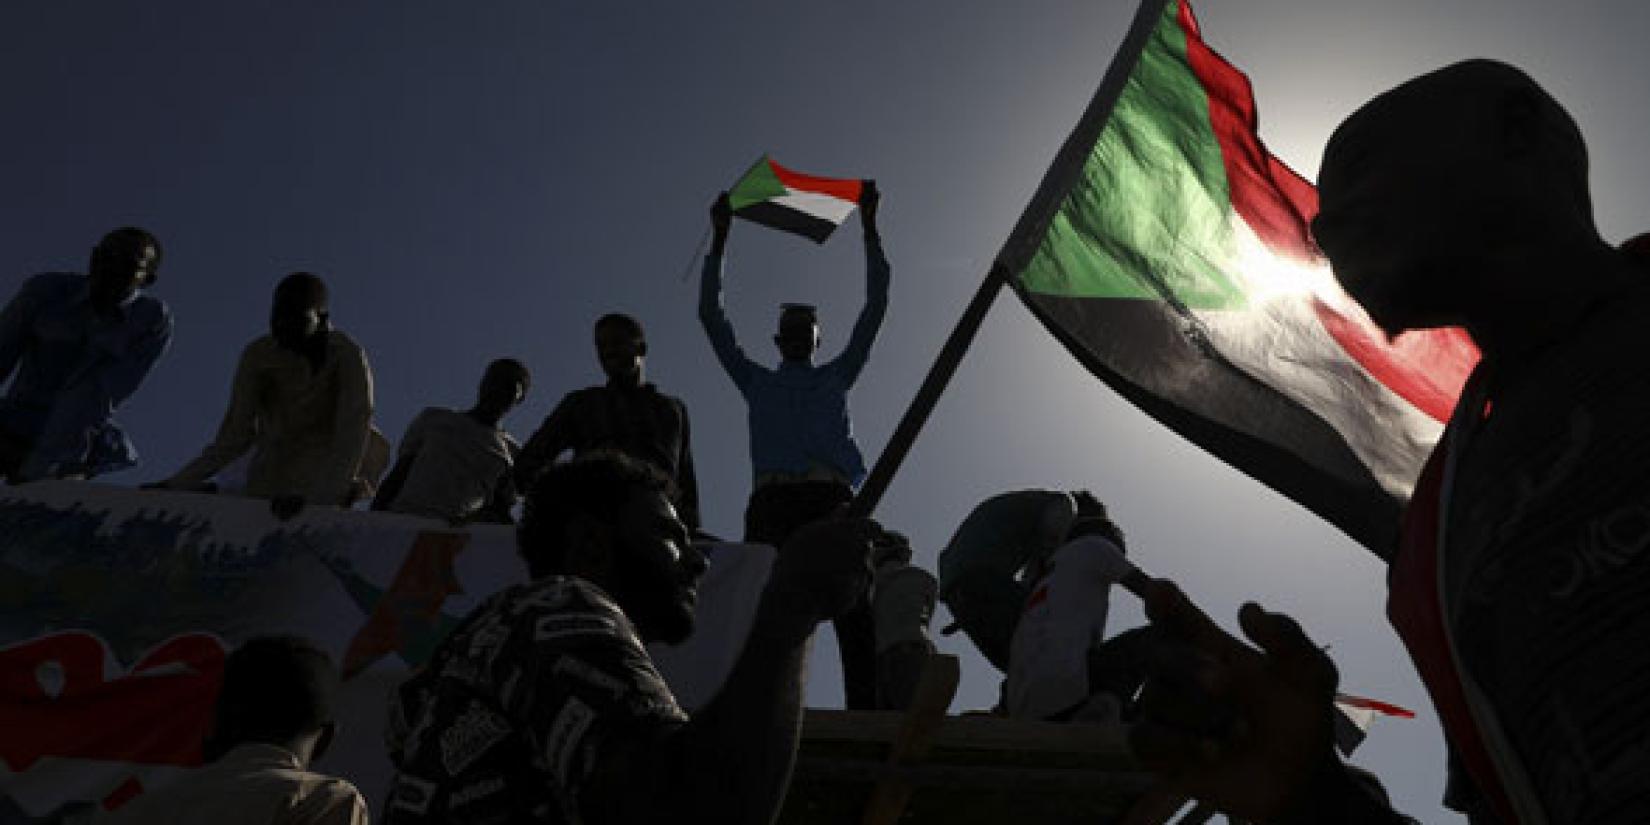 The situation in Sudan's Darfur region remains tense even after the fall of ex-president Omar al-Bashir, wanted for genocide, in 2019. © Keystone